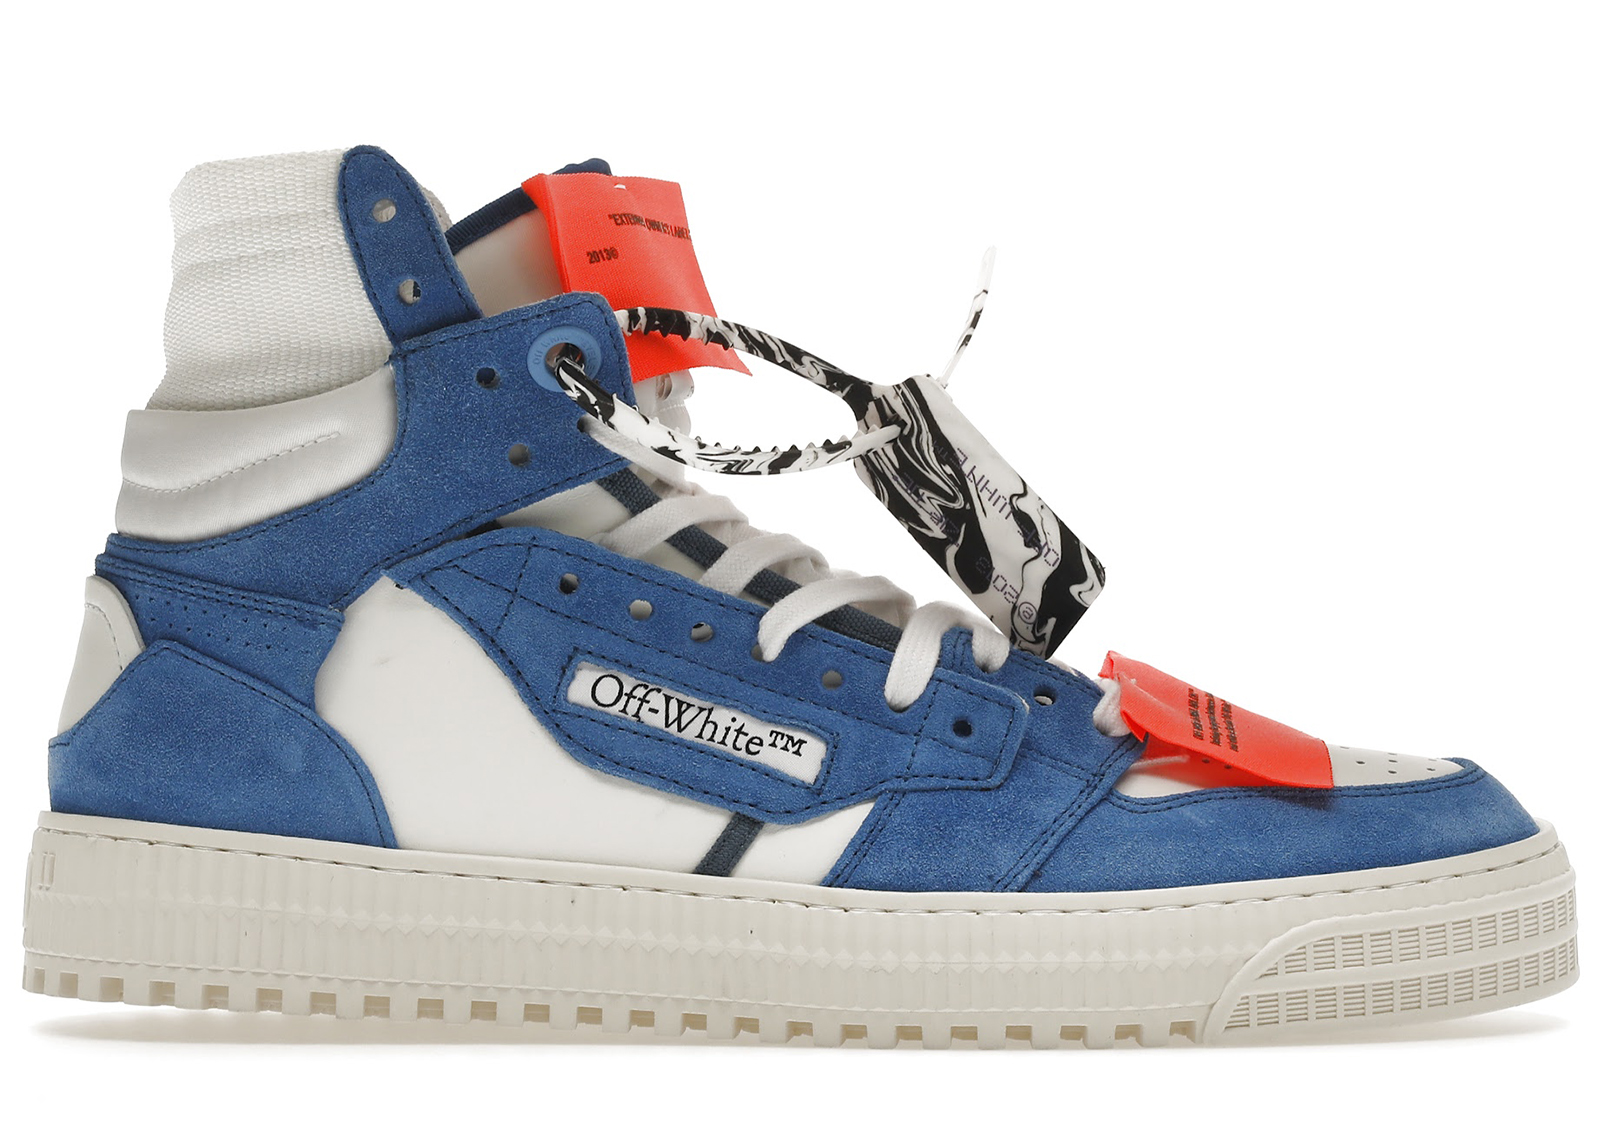 Off-White Odsy-1000 Sneakers - Farfetch